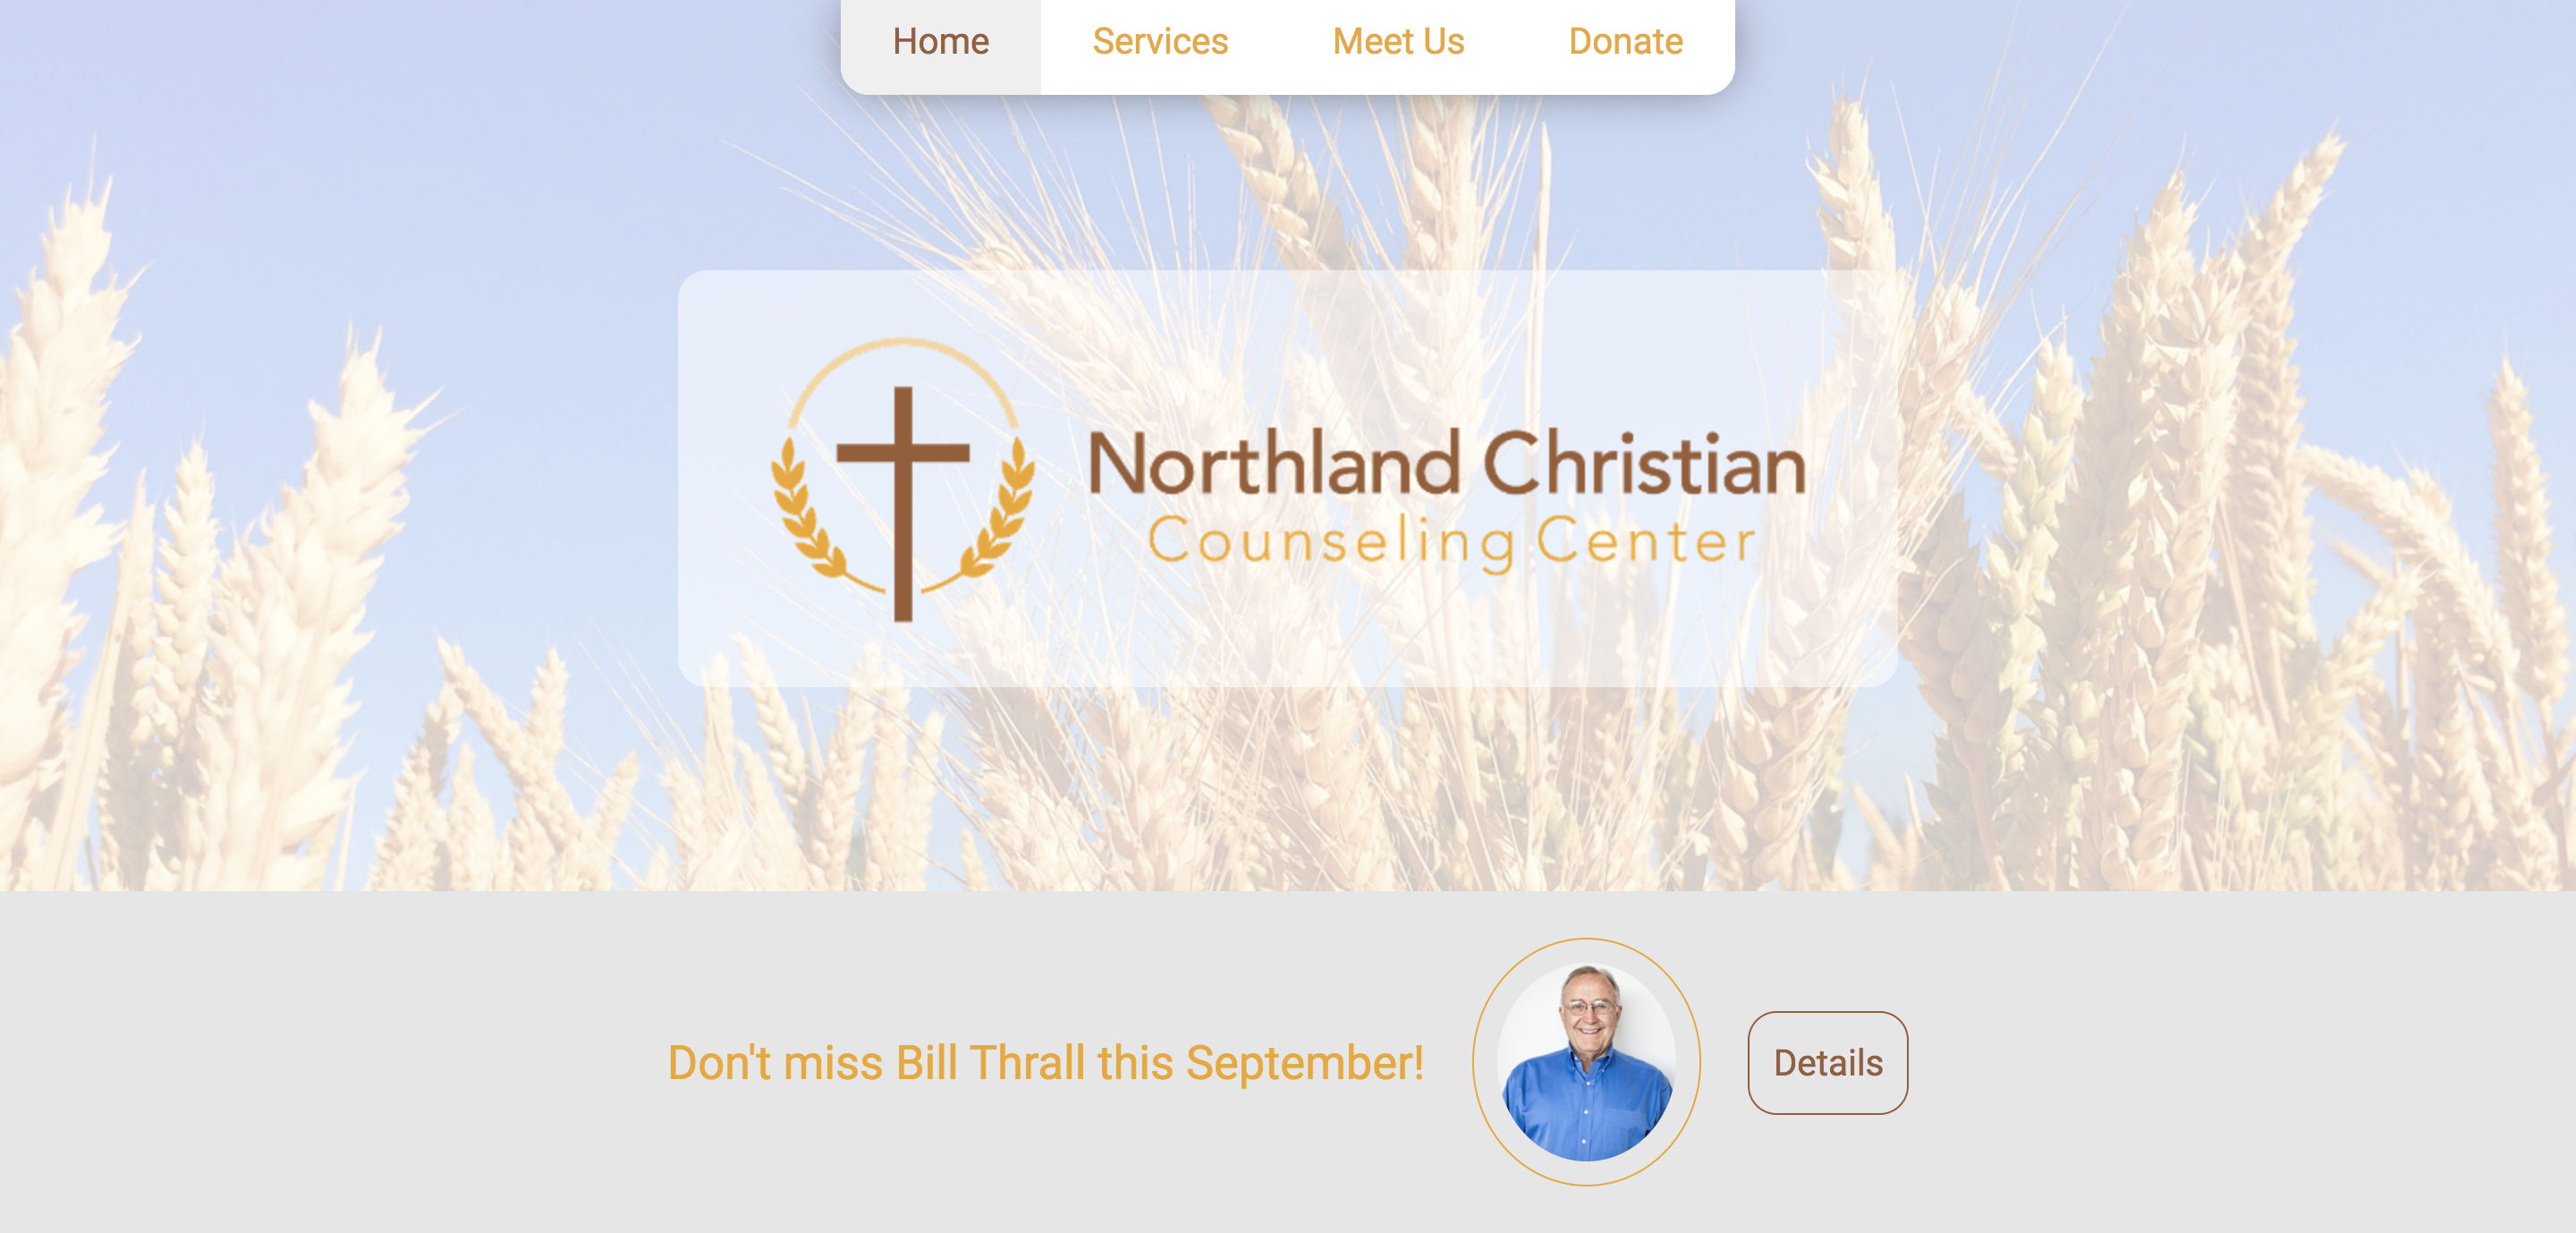 Northland Christian Counseling Center Site Home Page: Part 1